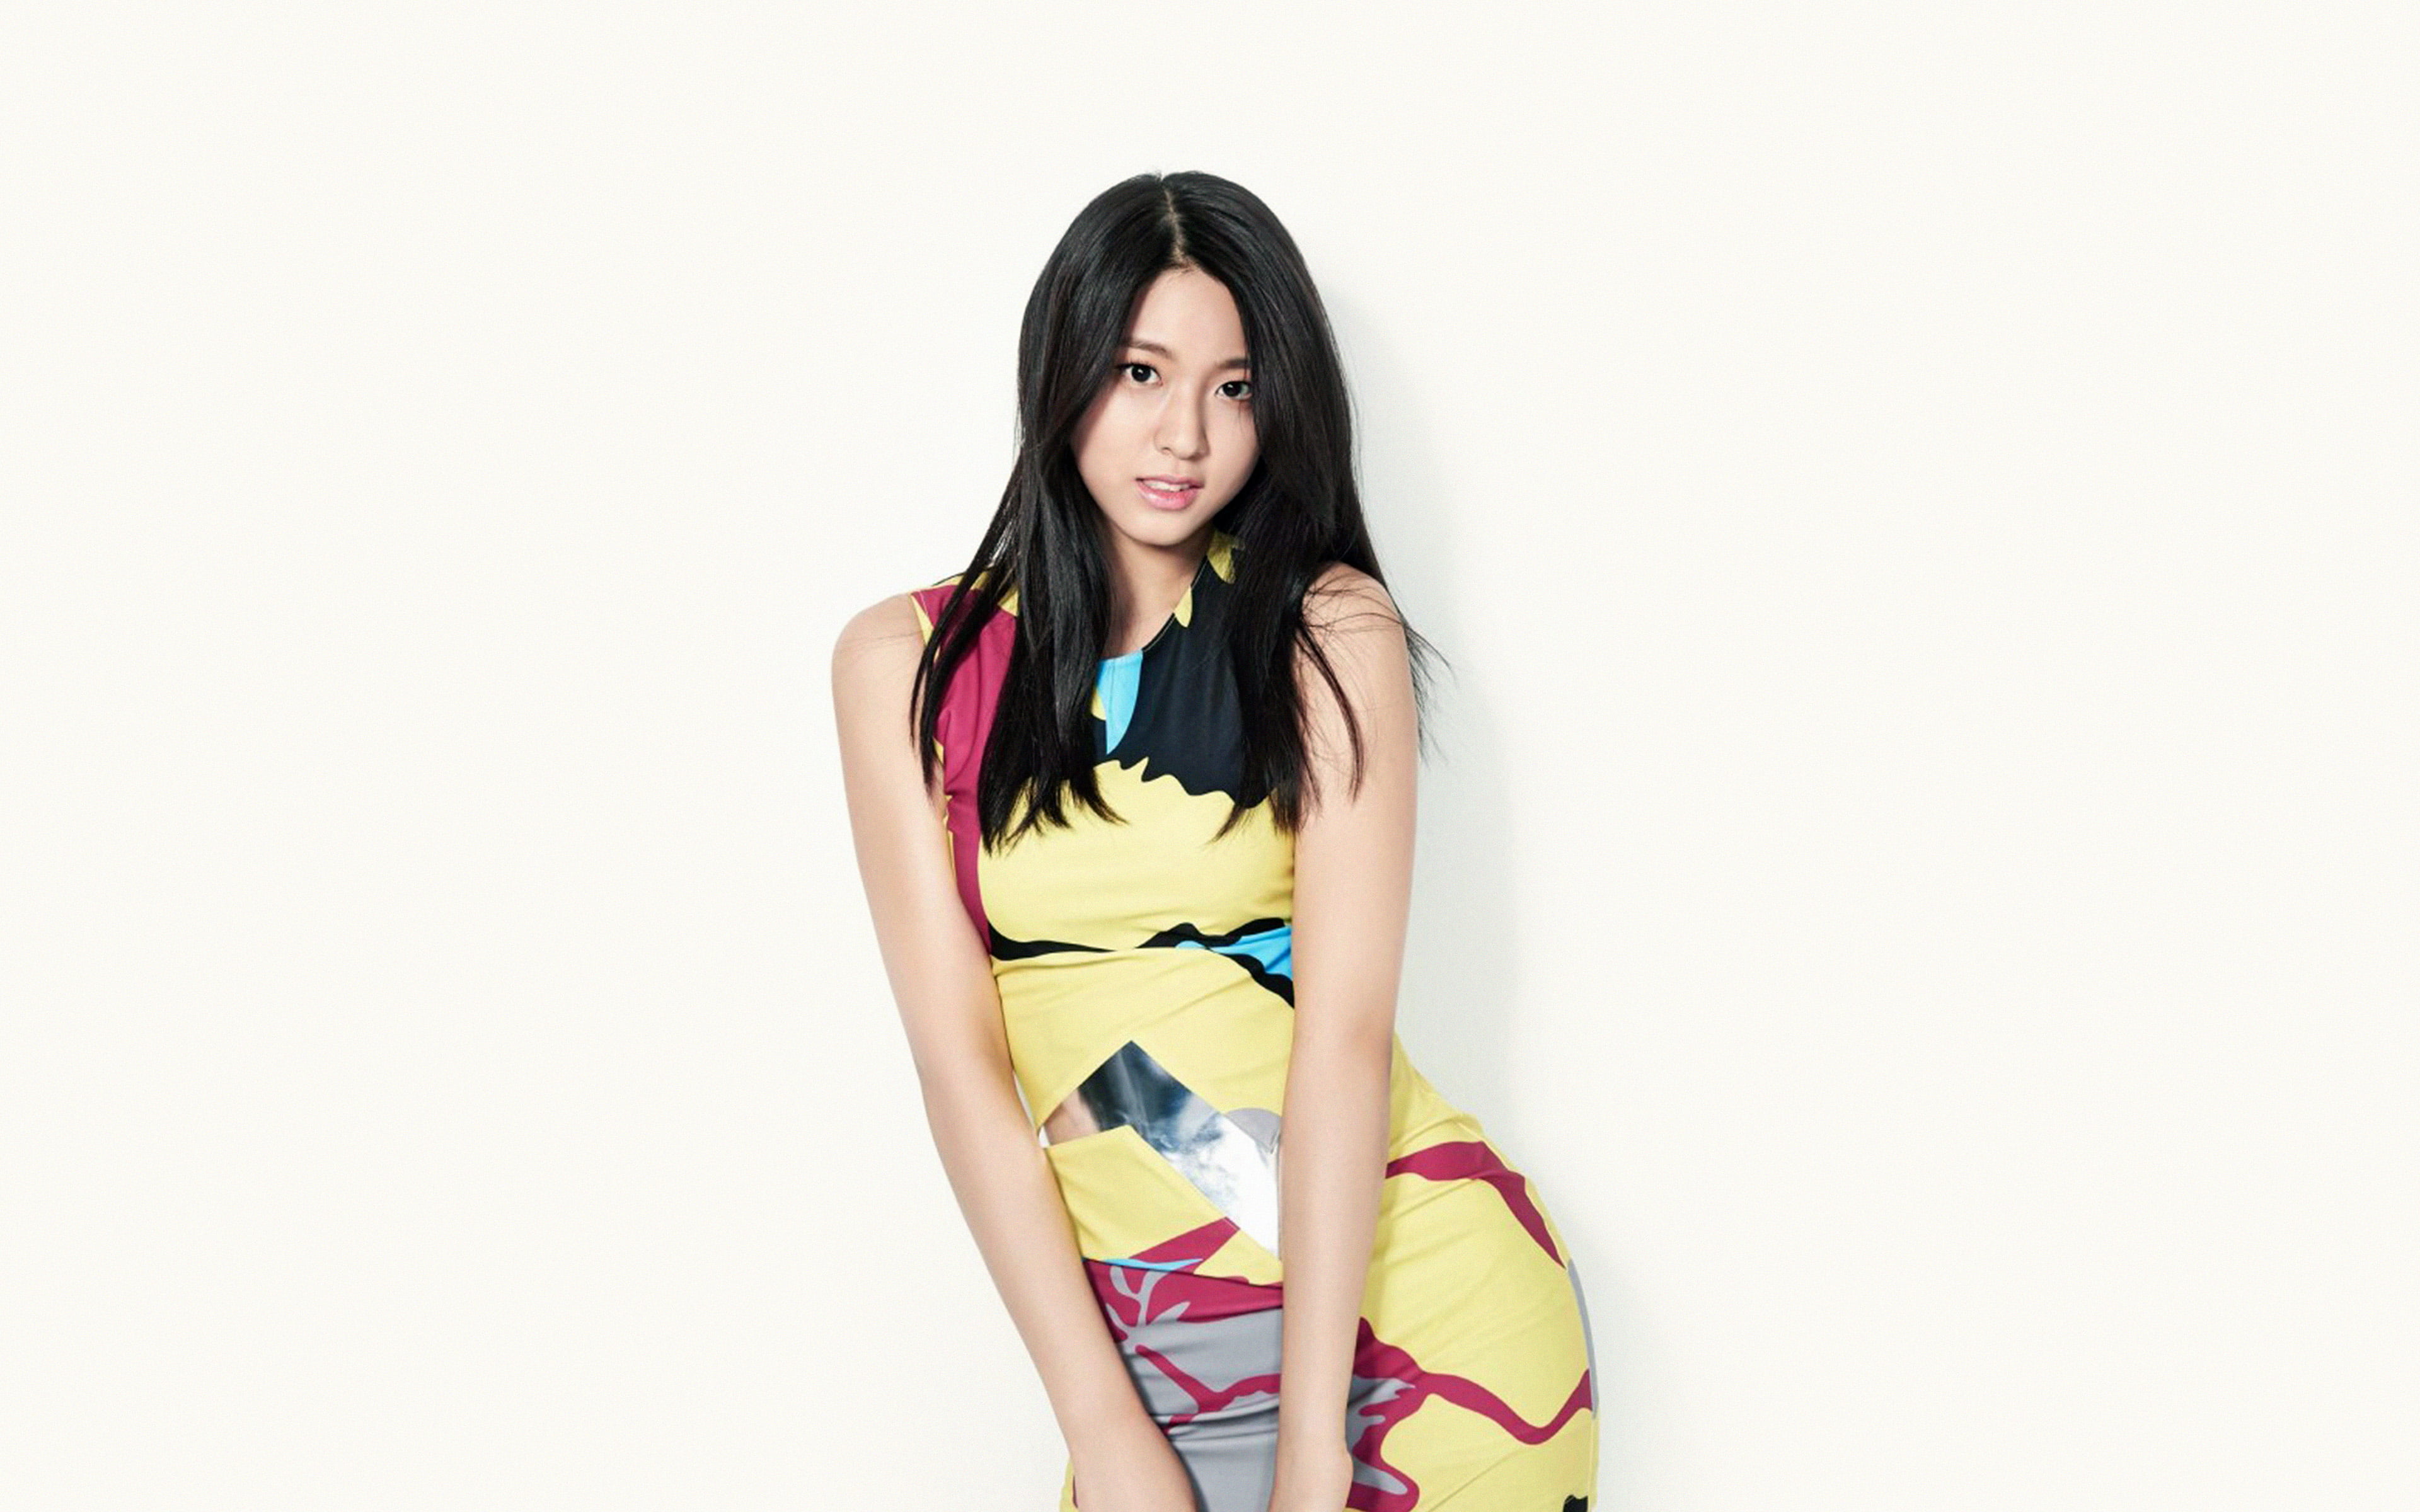 seolhyun, aoa, kpop, love, cute, white, young adult, one person